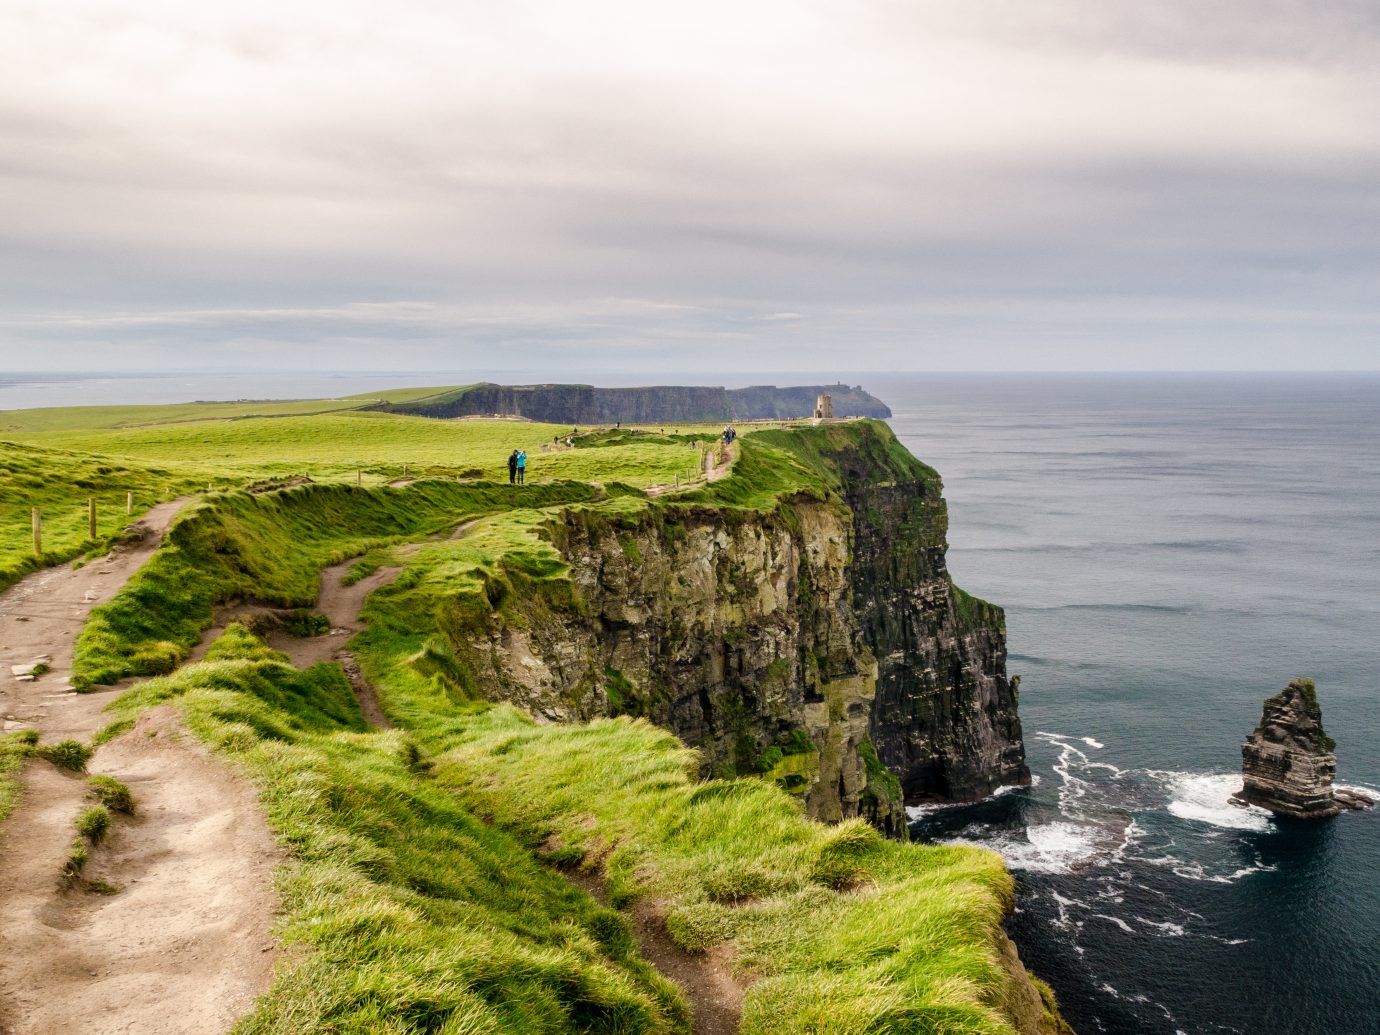 People walking along the edge of Ireland's Cliffs of Moher